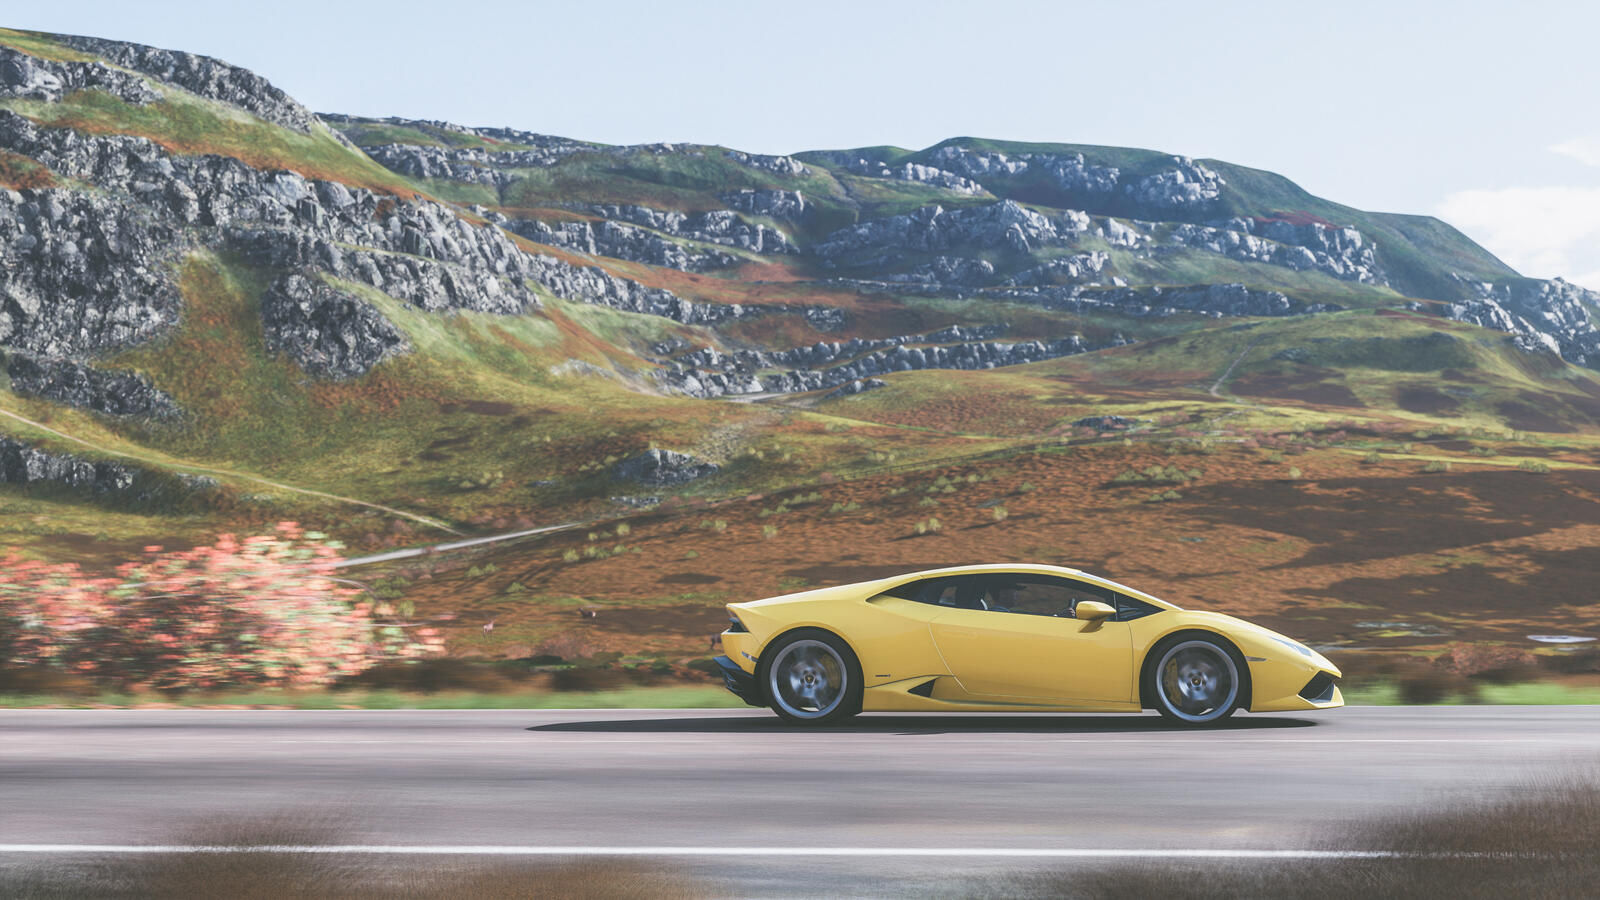 Wallpapers Forza Horizon 4 Forza the 2018 Games on the desktop